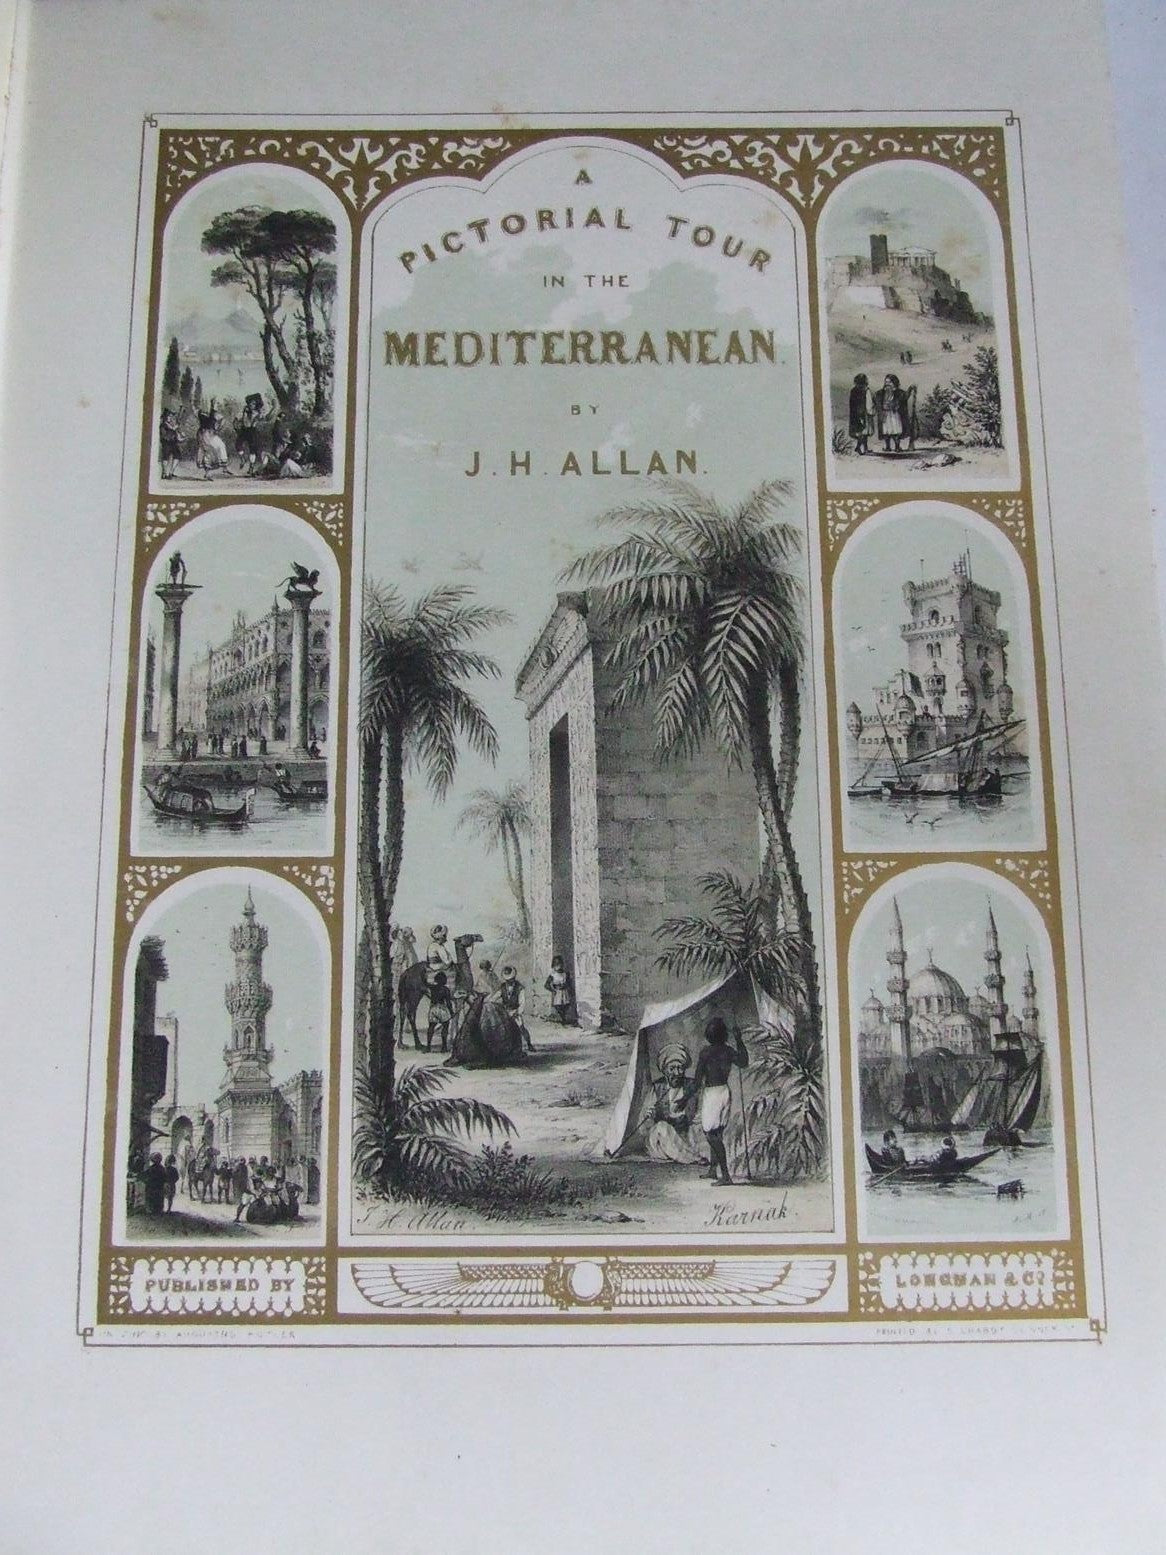 A Pictorial Tour in the Mediterranean